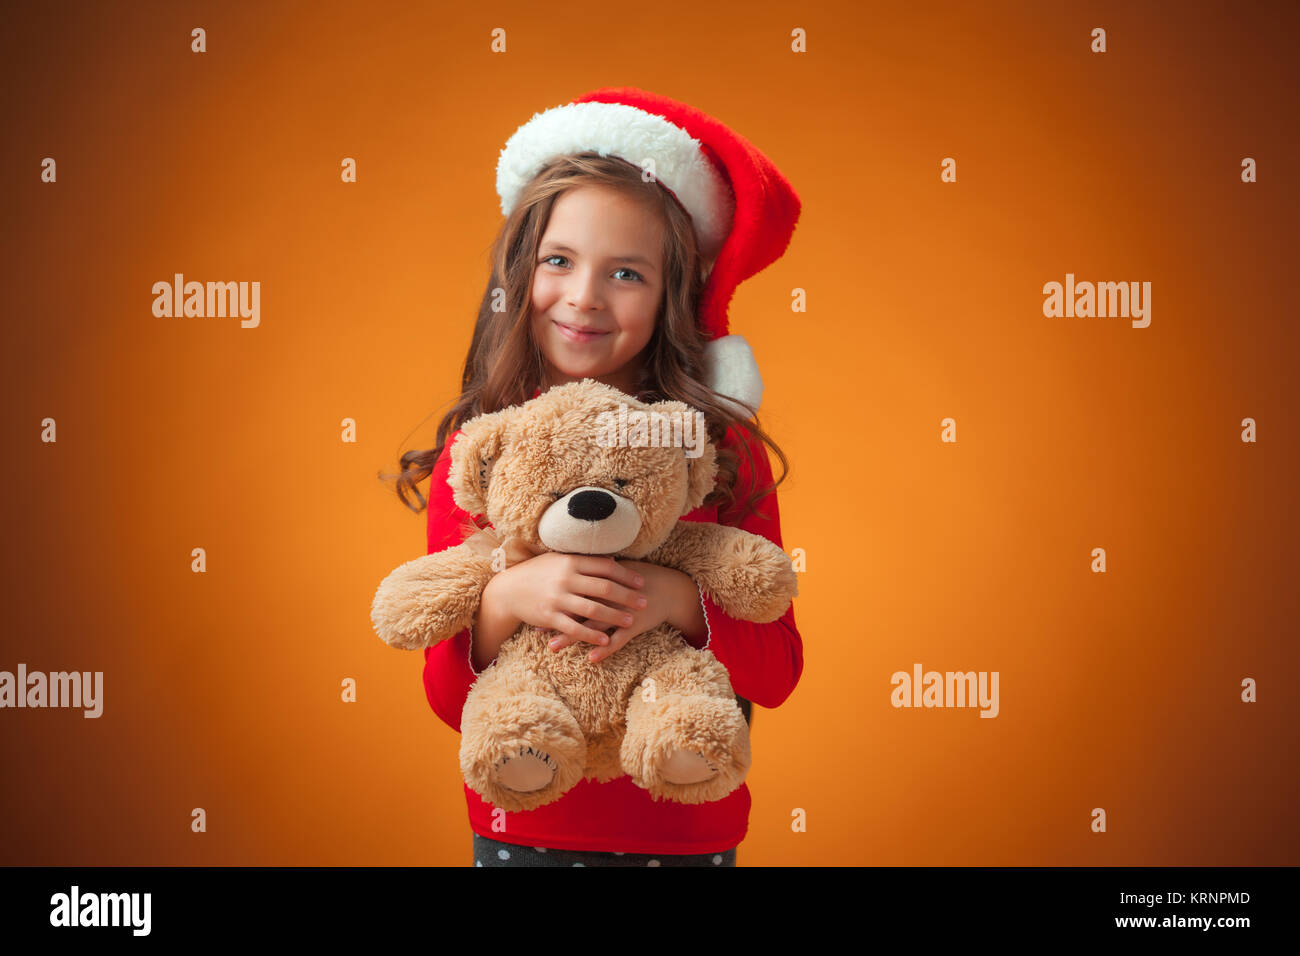 The cute cheerful little girl on orange background Stock Photo